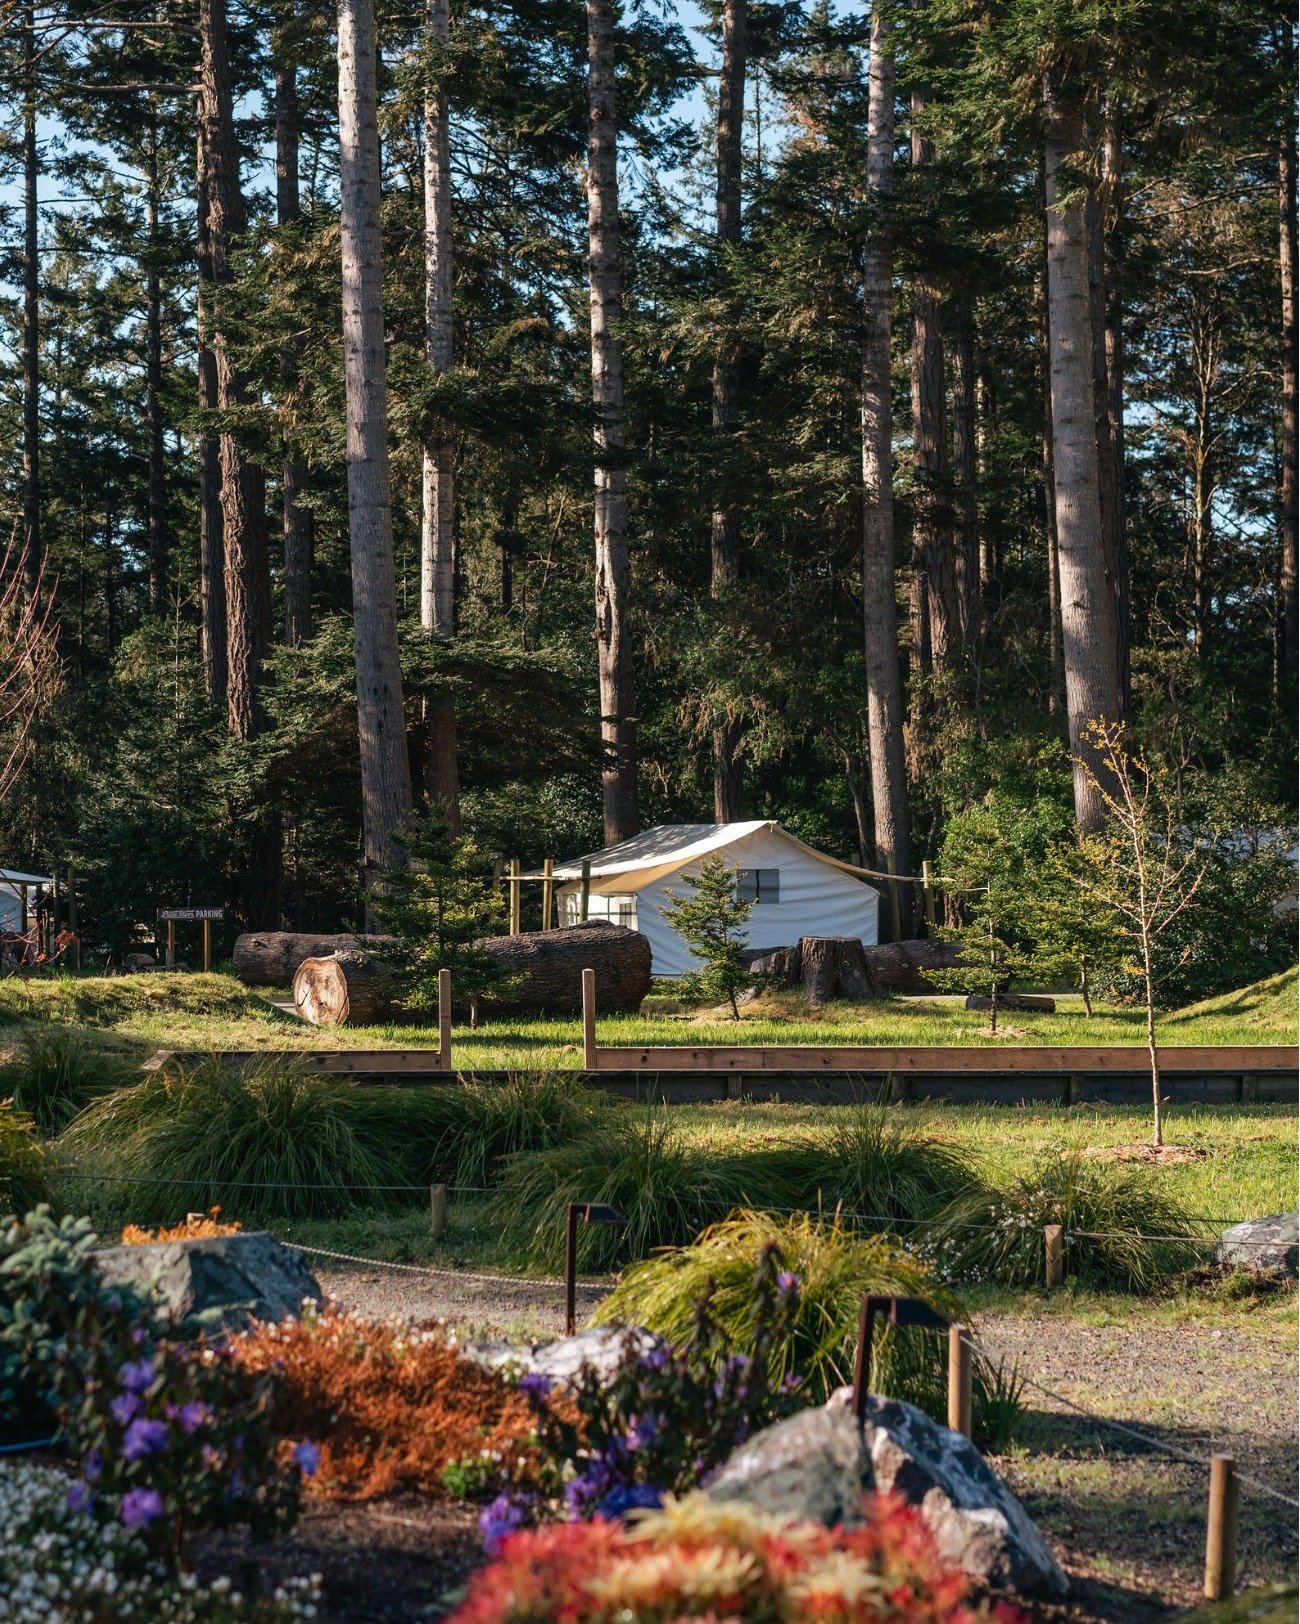 Spring camping at Mendocino Grove is an experience like no other! 🏕️ Don't miss out on the chance to immerse yourself in the beauty of blooming flowers, crisp coastal air, and tranquil surroundings. Have you made your reservation to visit us yet? Sw